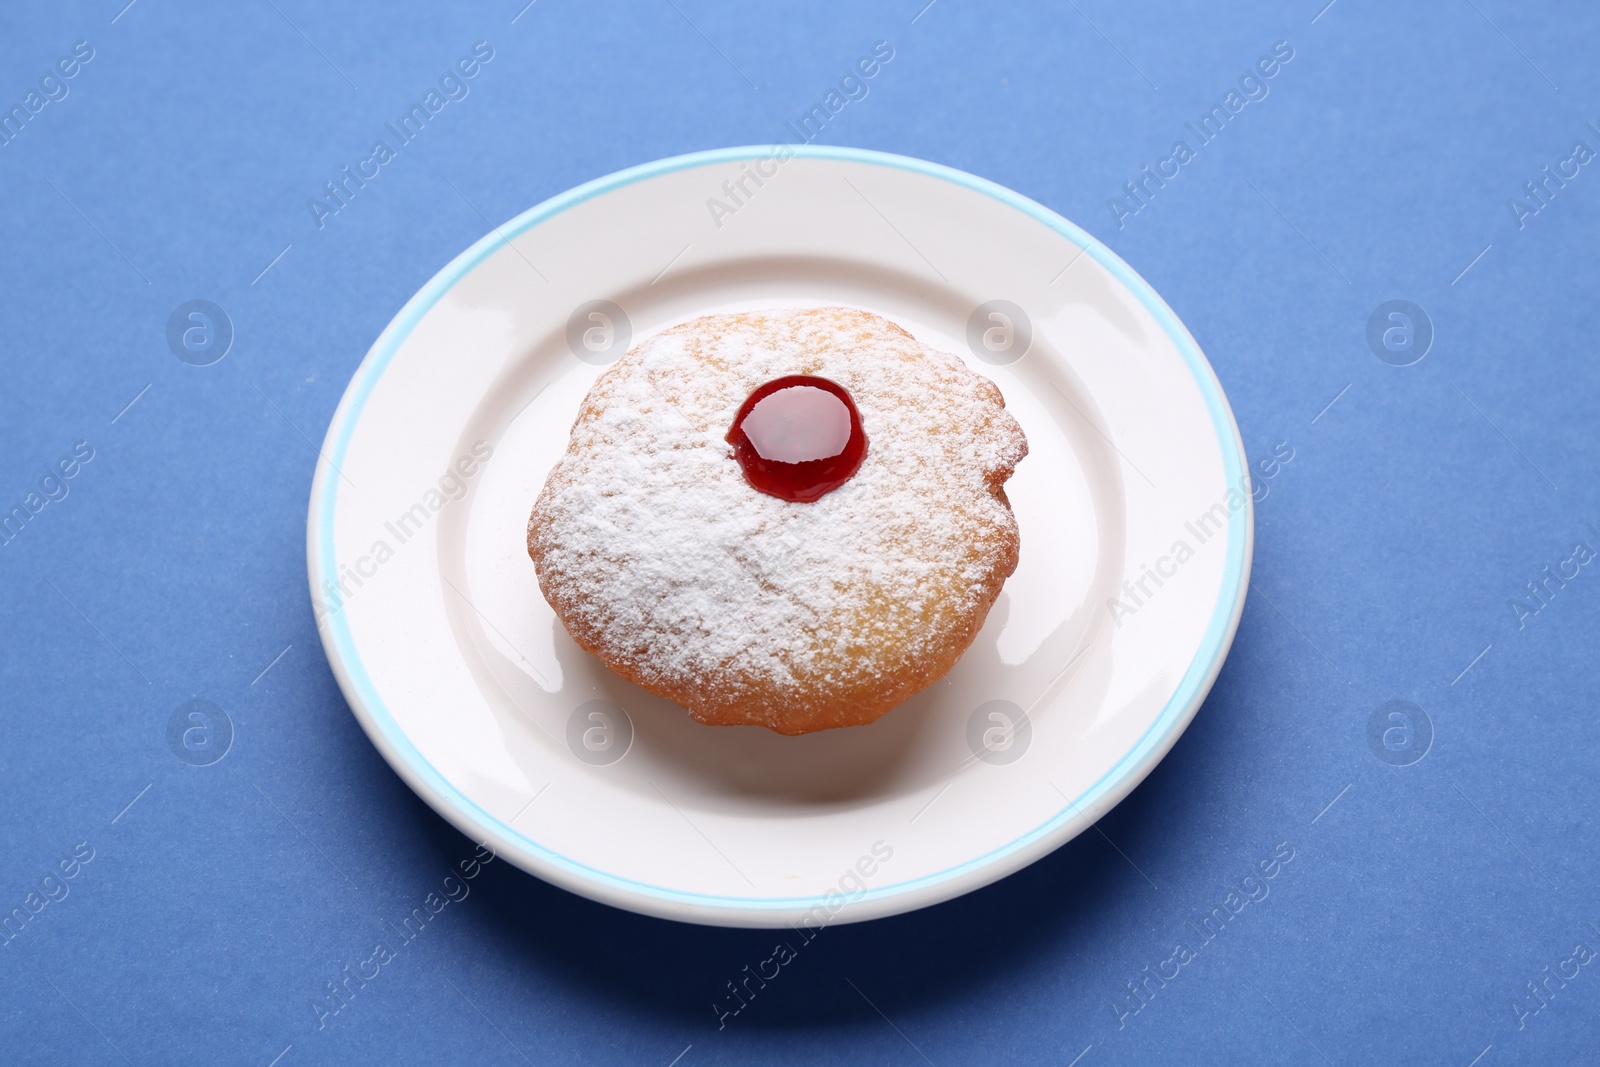 Photo of Hanukkah donut with jelly and powdered sugar on blue background